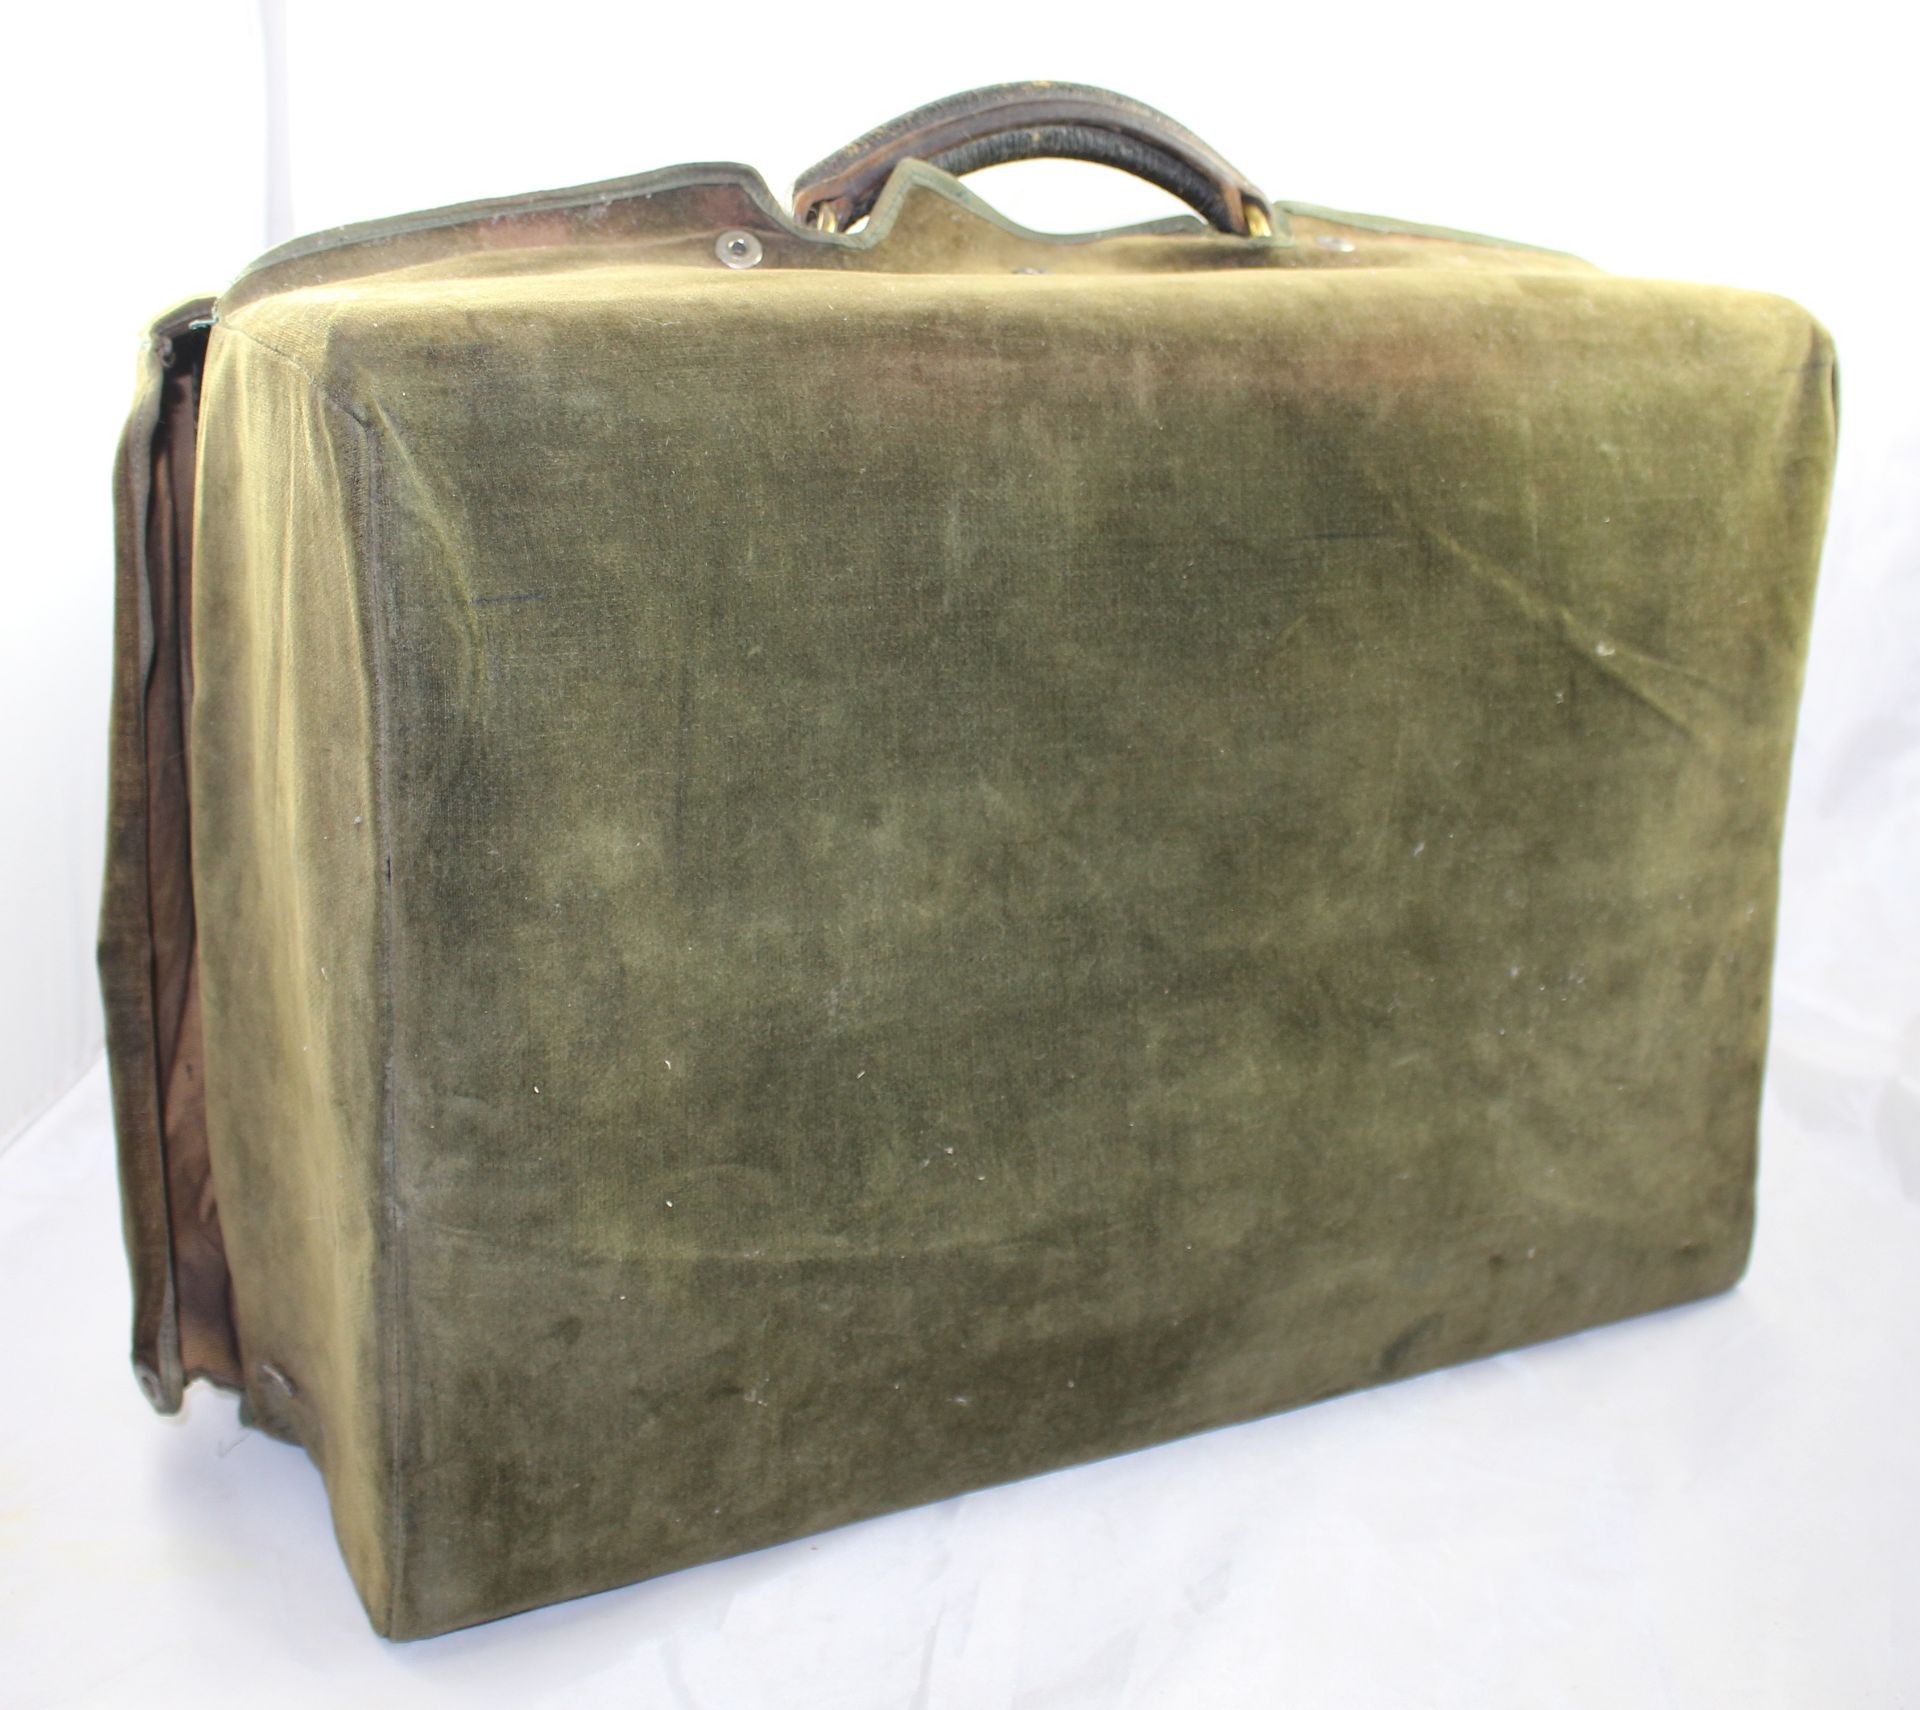 Early 20th c. Cased Silver Travelling Vanity Case by Walker & Hall - Image 15 of 16